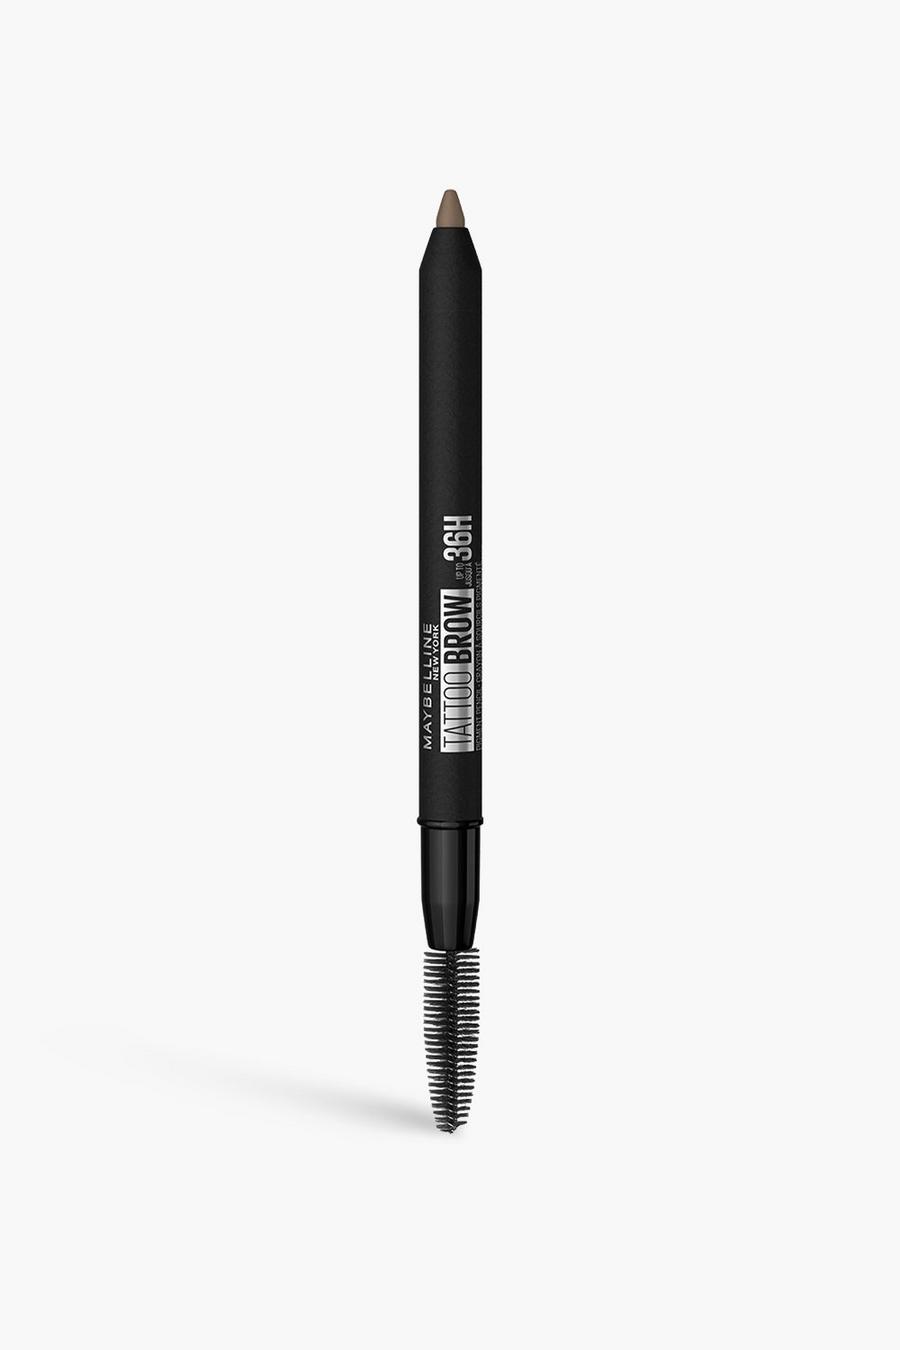 Maybelline Tattoo Brow Semi Permanent 36HR Eyebrow Pencil - Blonde 02 image number 1